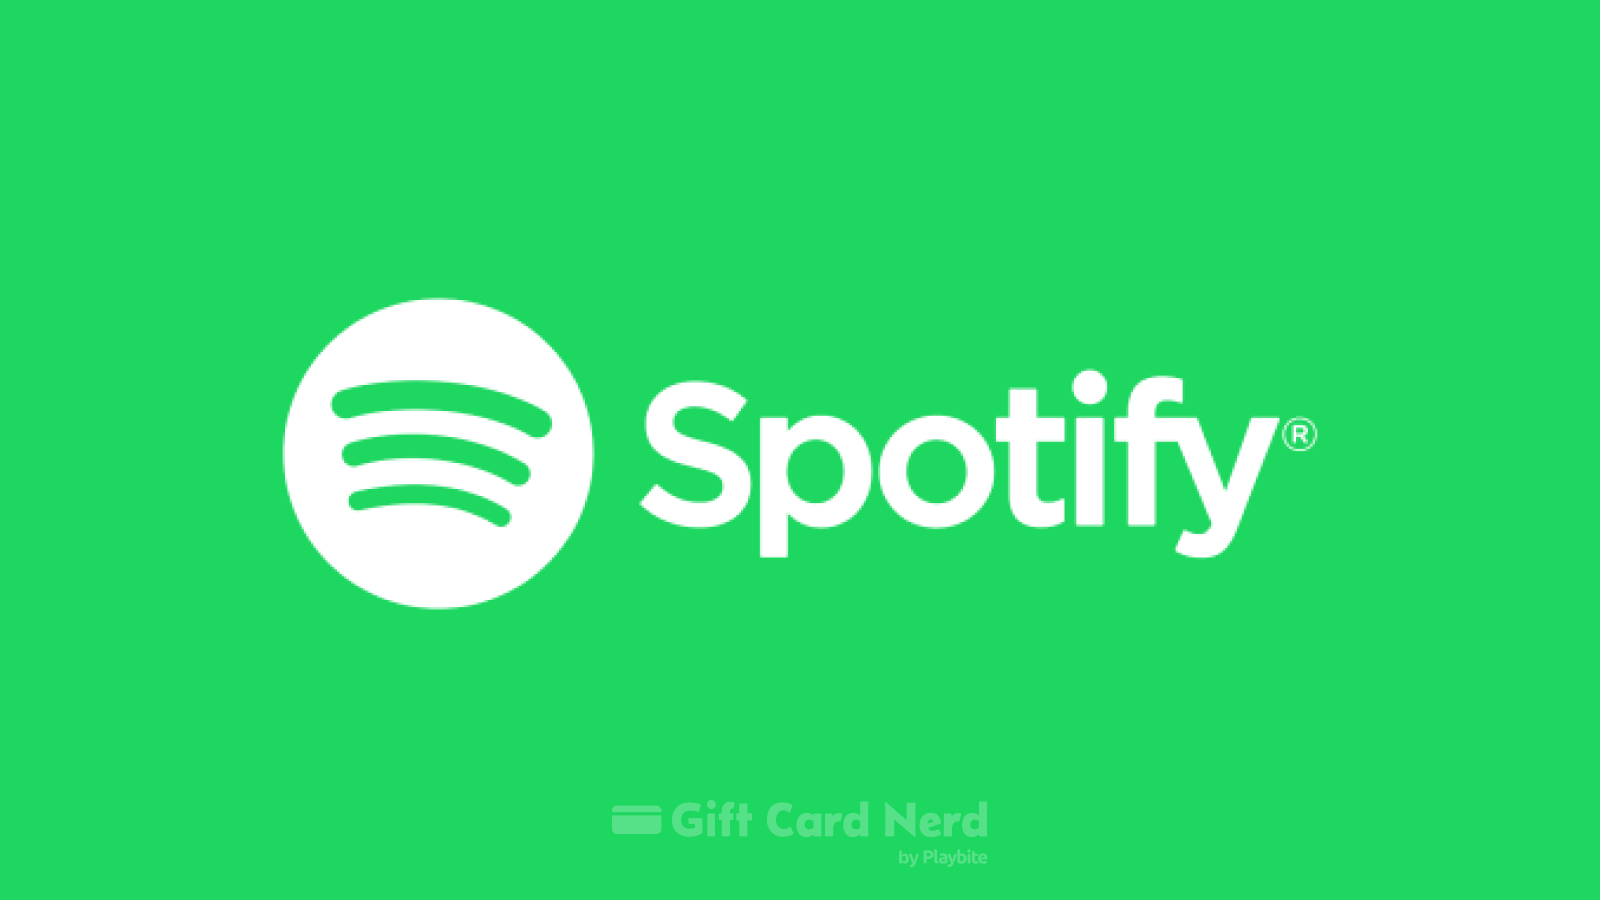 Can I Use a Spotify Gift Card on Cash App?